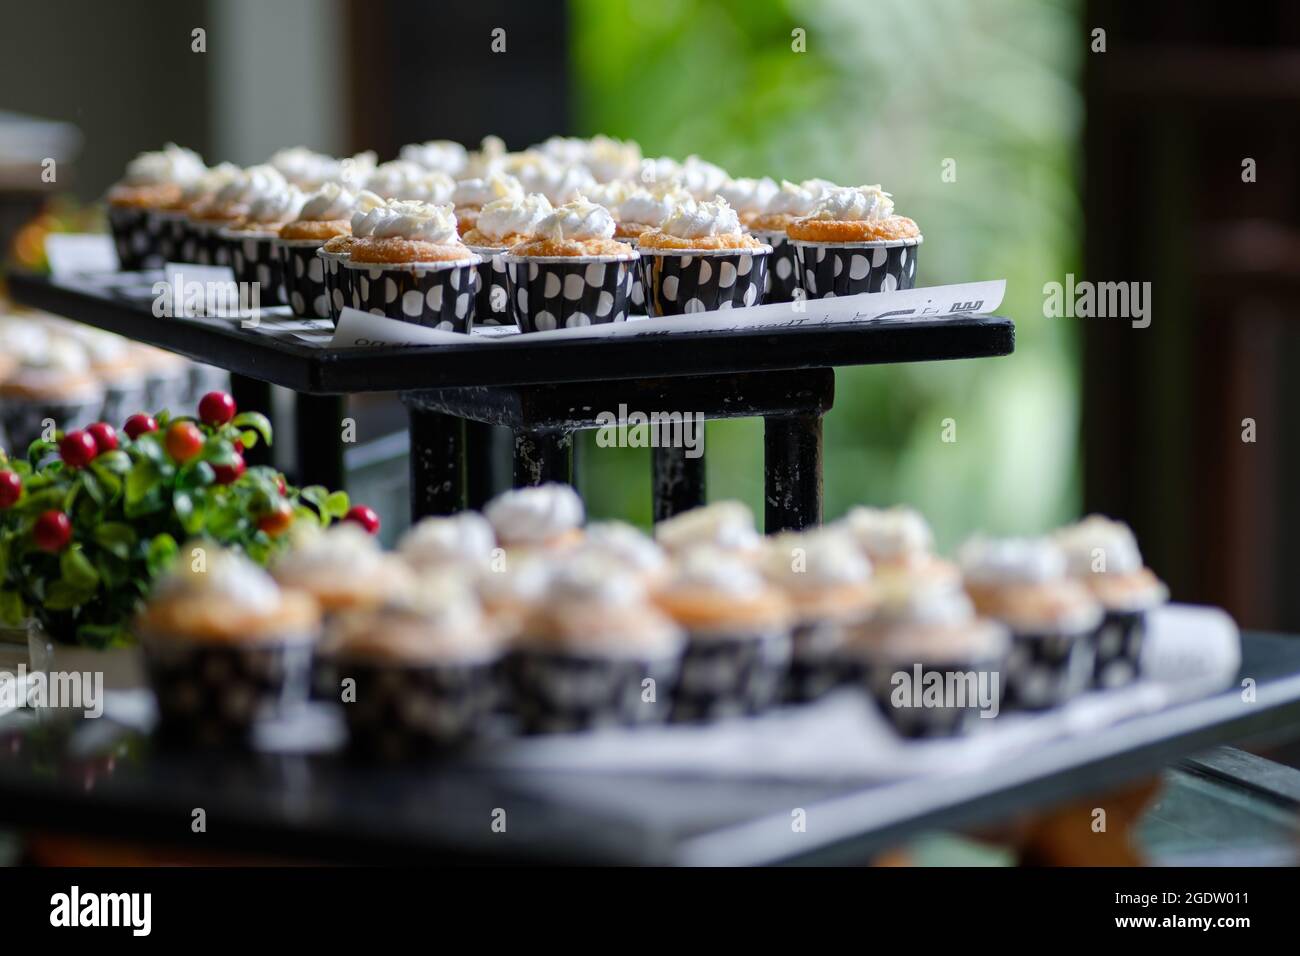 https://c8.alamy.com/comp/2GDW011/many-cupcakes-on-table-for-lunch-2GDW011.jpg